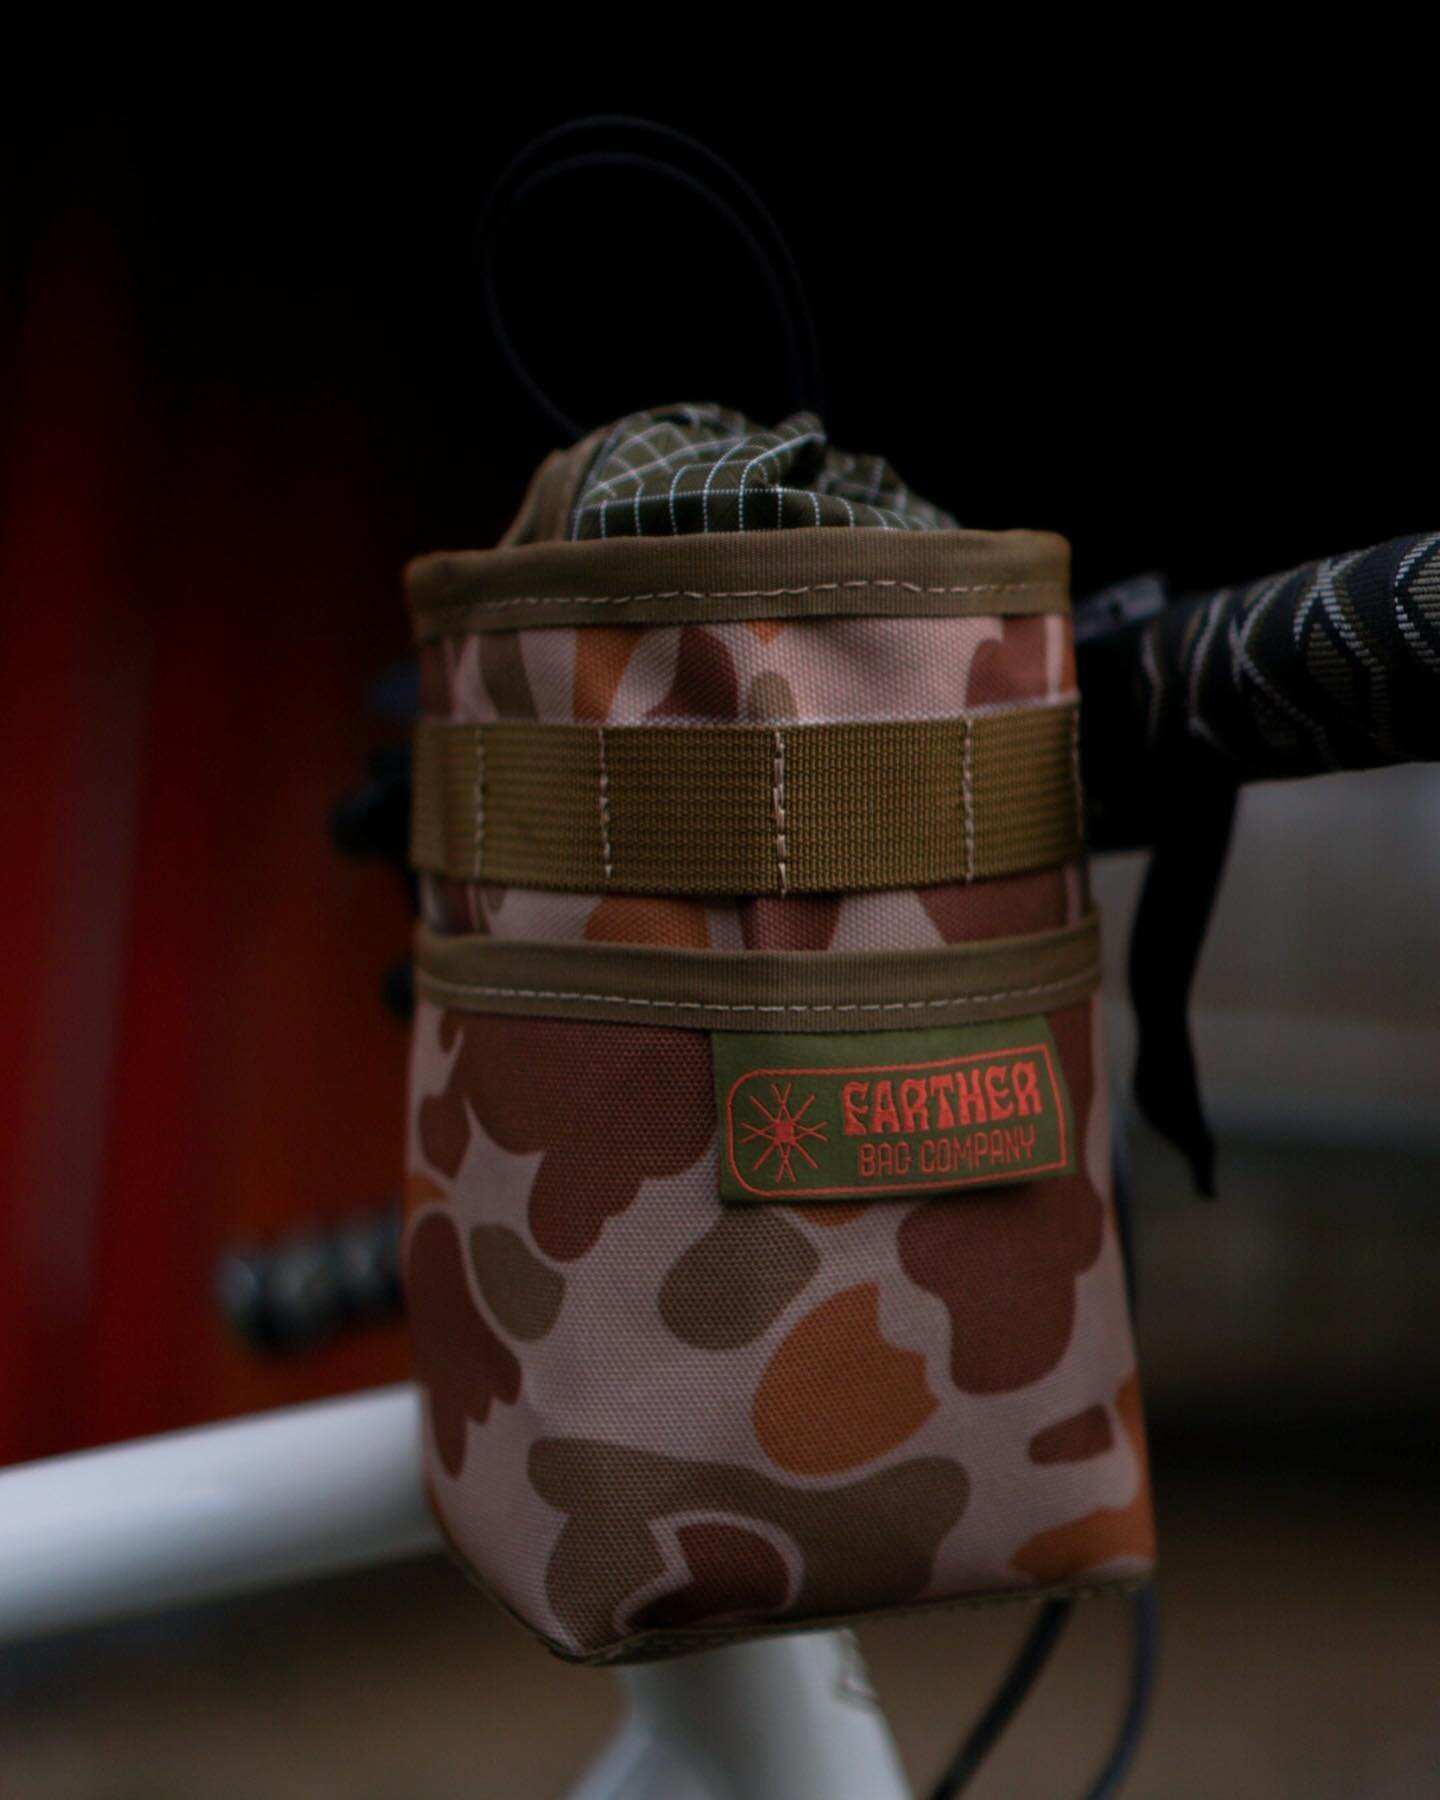 If you like saving money and missed your chance to snag a duck camo stem bag here&rsquo;s your shot. This is the bag I rode around with and shot photos of. Slightly used and discounted. This is the last stem bag so grab it while ya can!